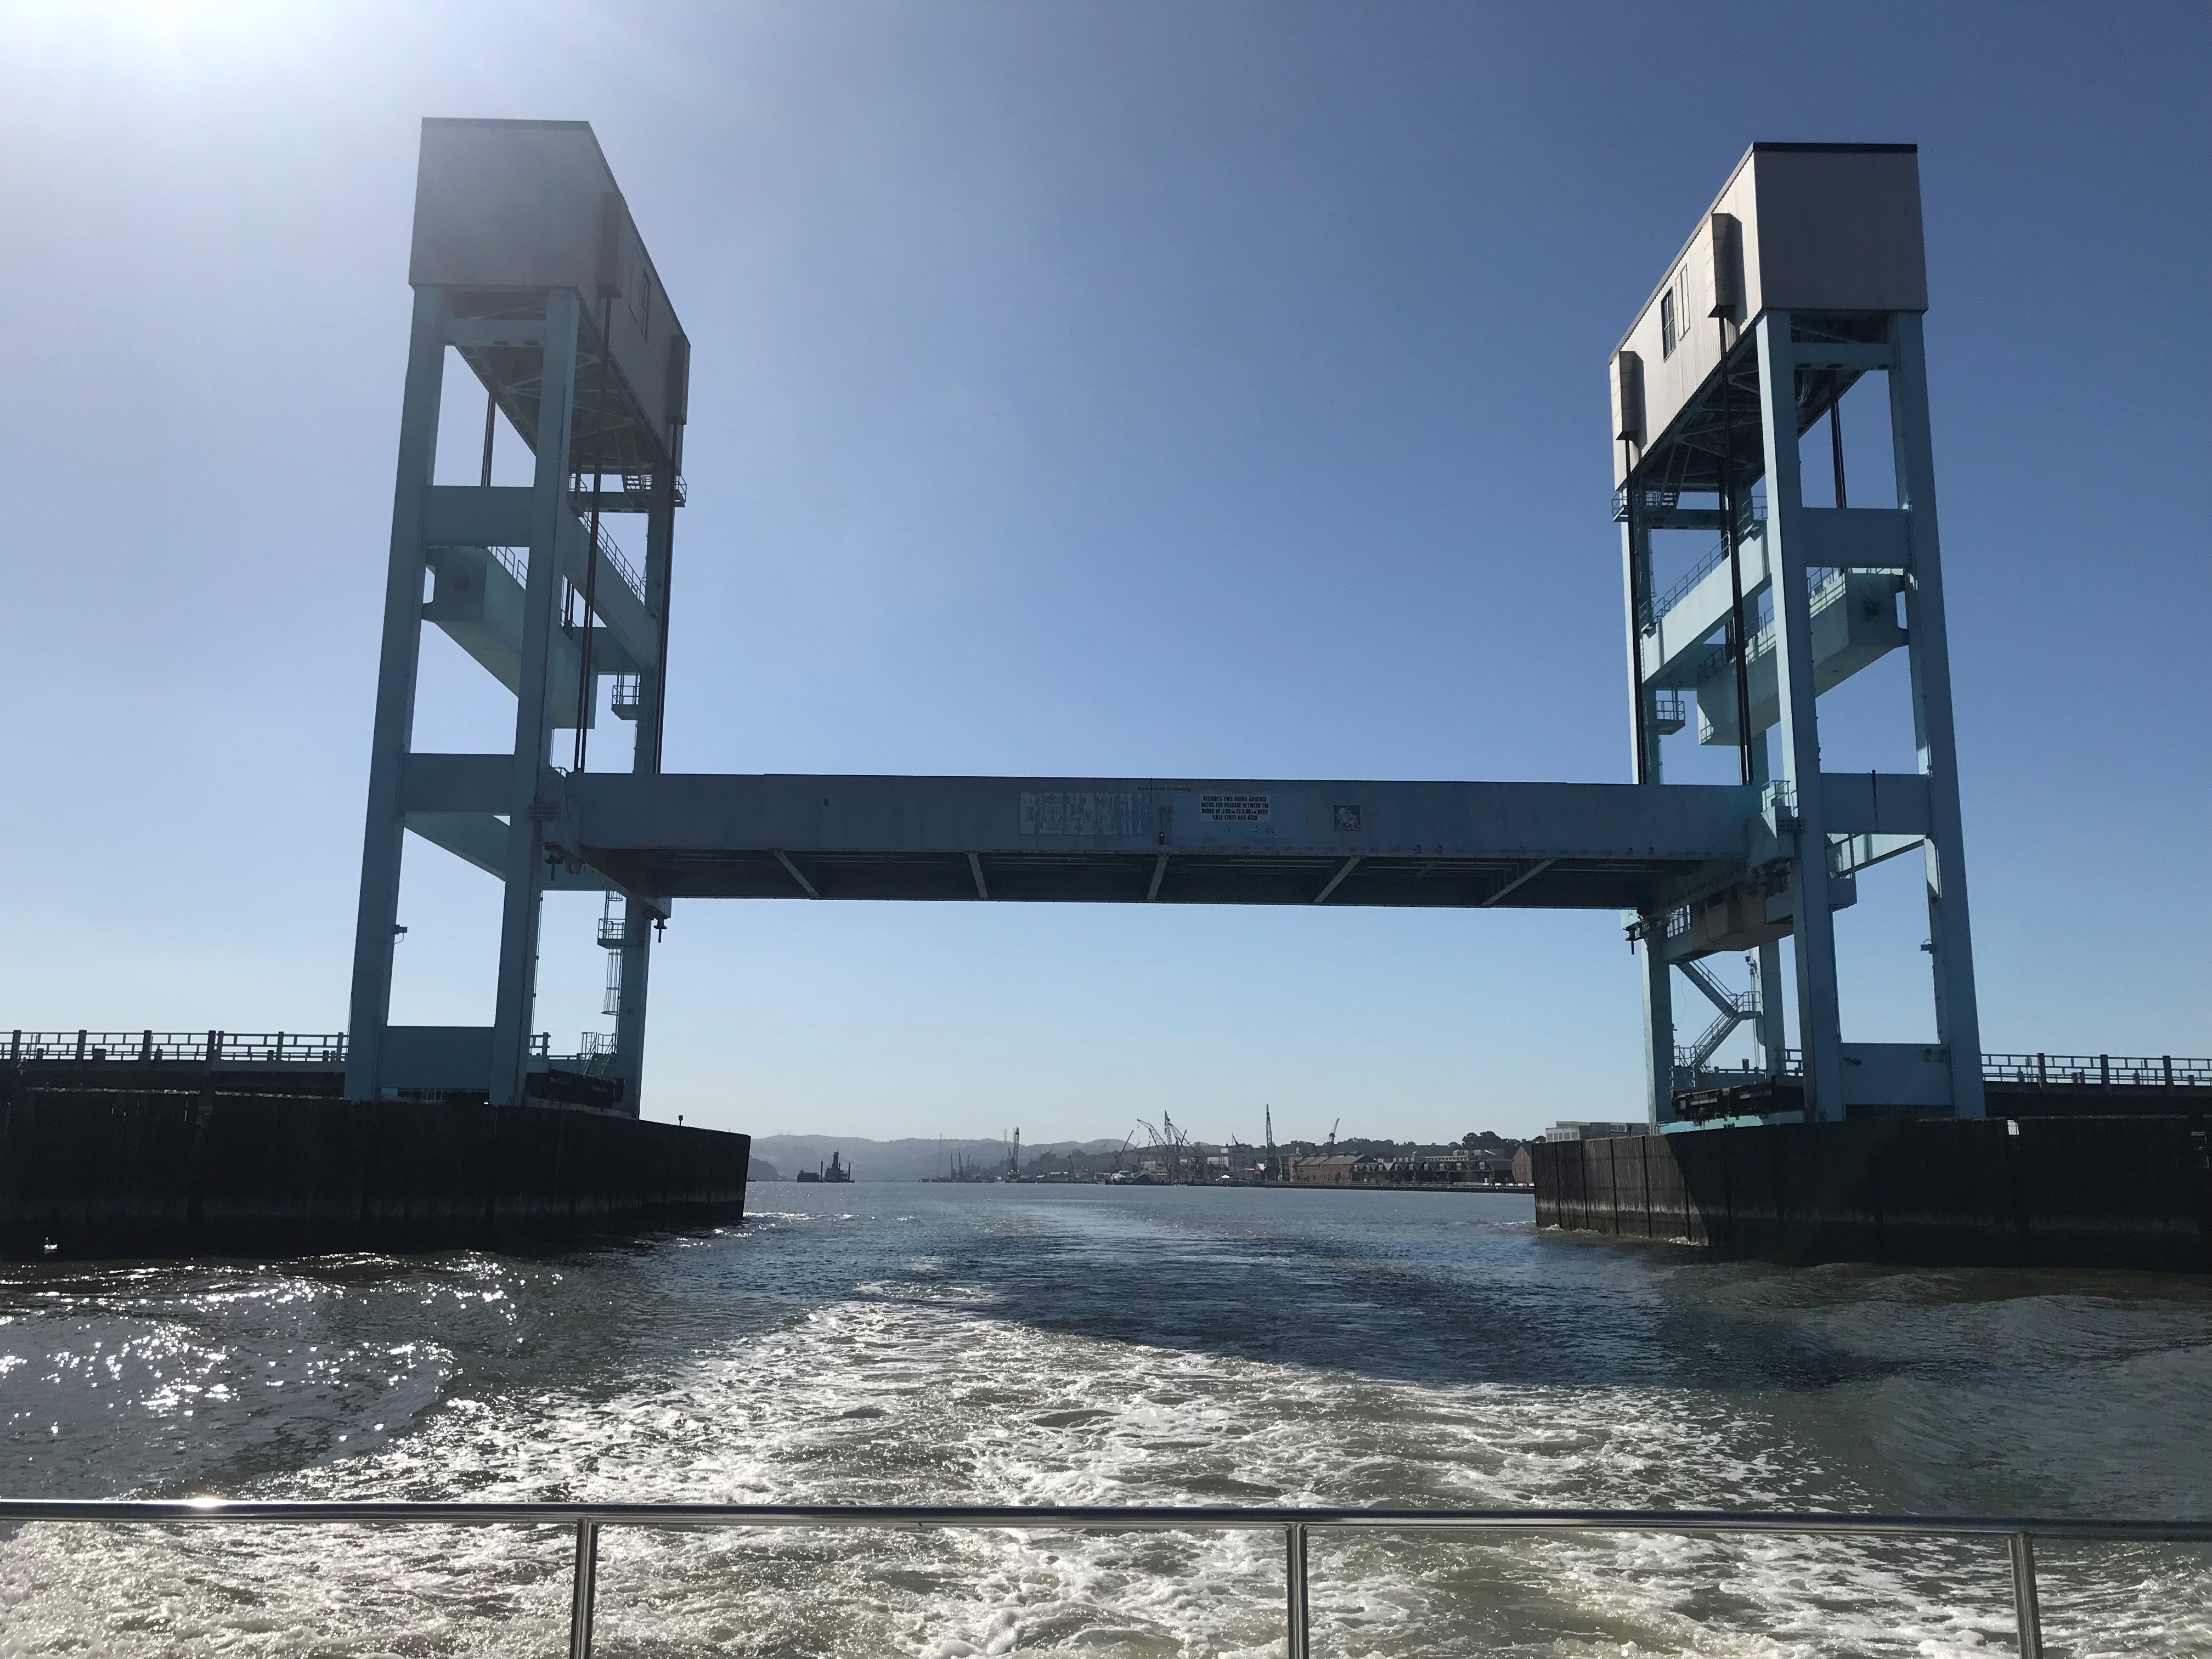 Passing beneath the lift drawbridge separating the Mare Island harbor from the Napa River